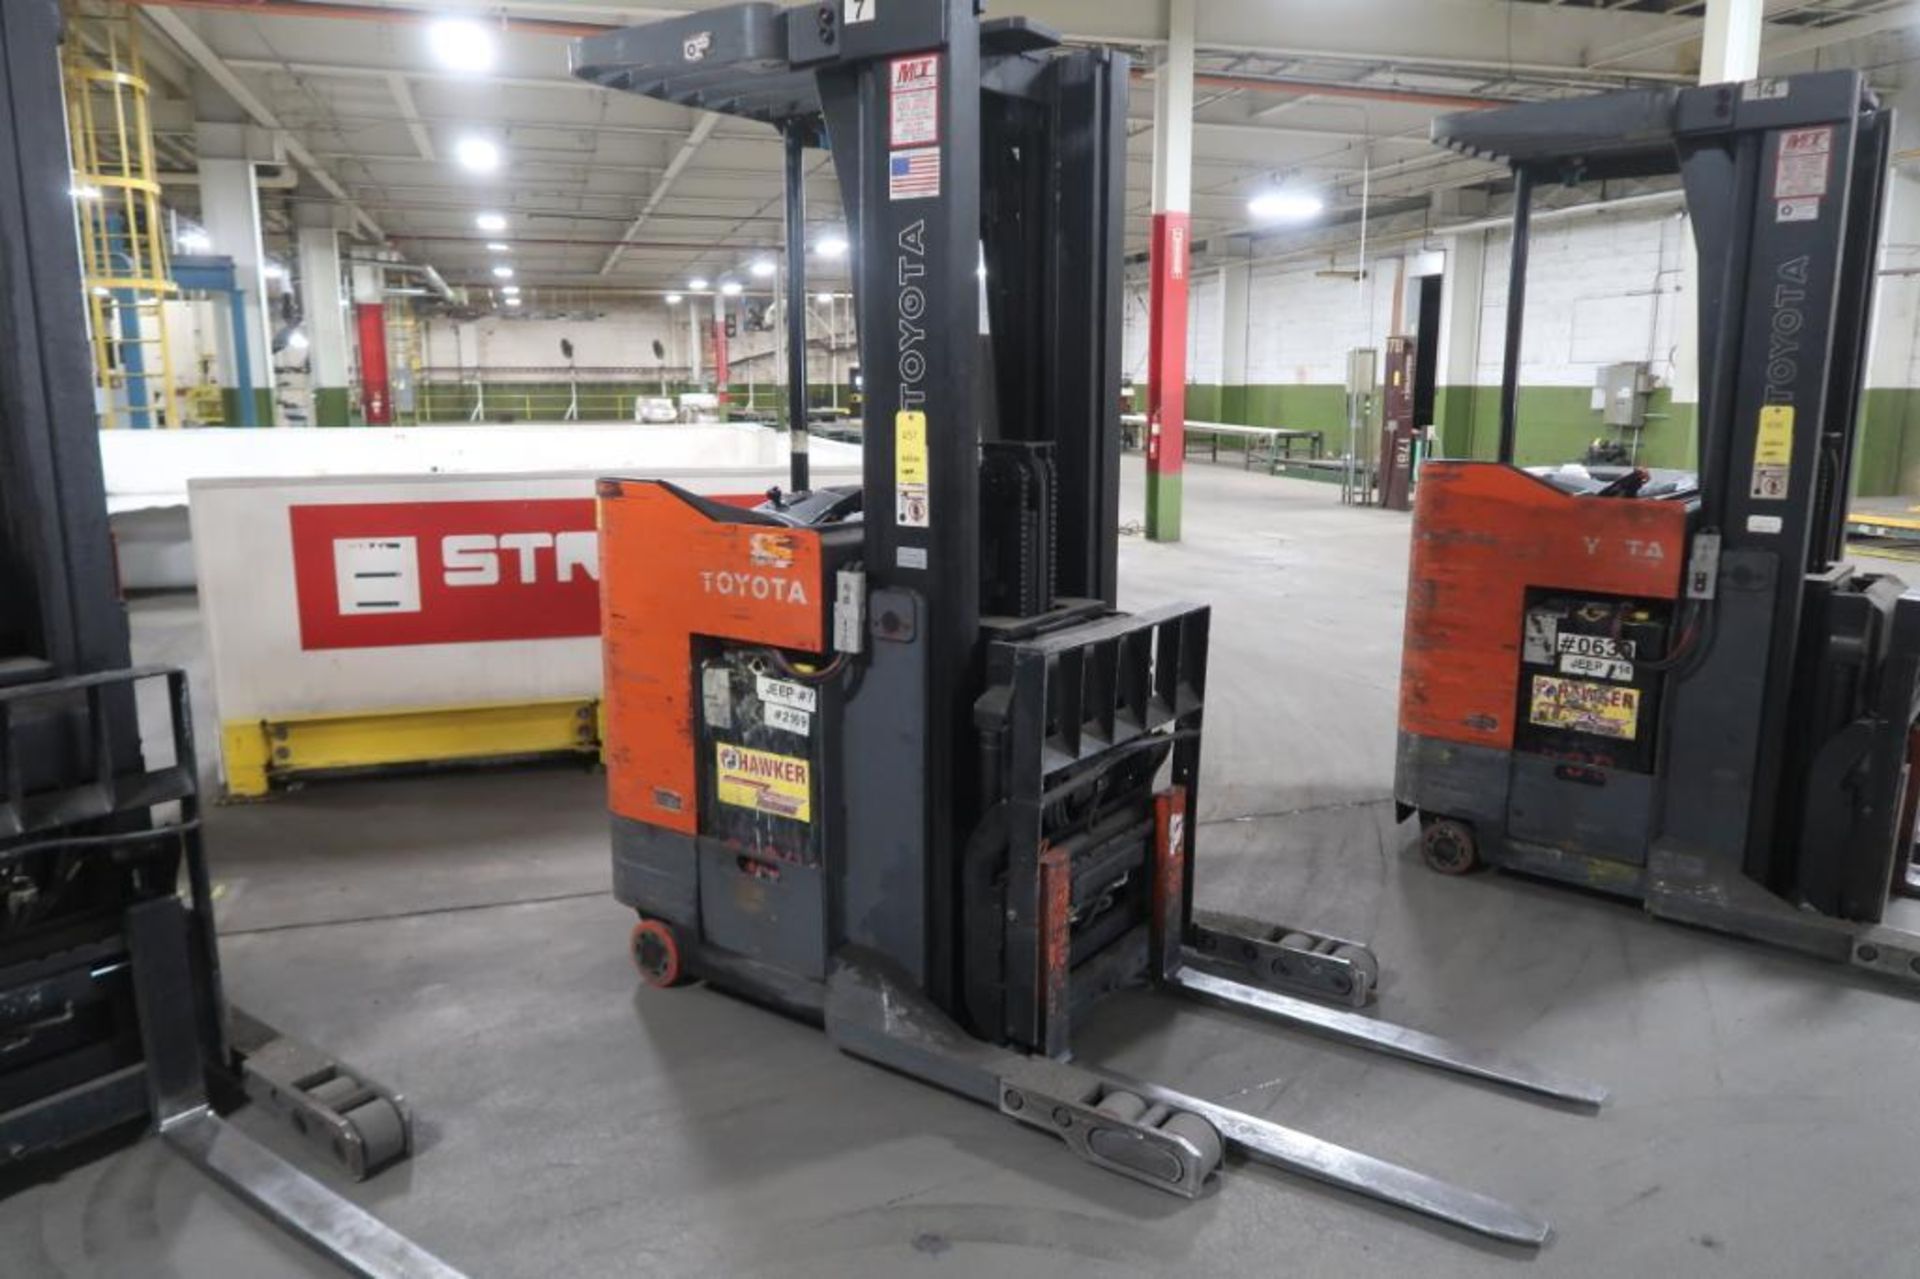 Toyota 4500 lb. Stand-up Reach Electric Forklift Model 6BR023, S/N 30557, 4888 hours, LOCATION: MAIN